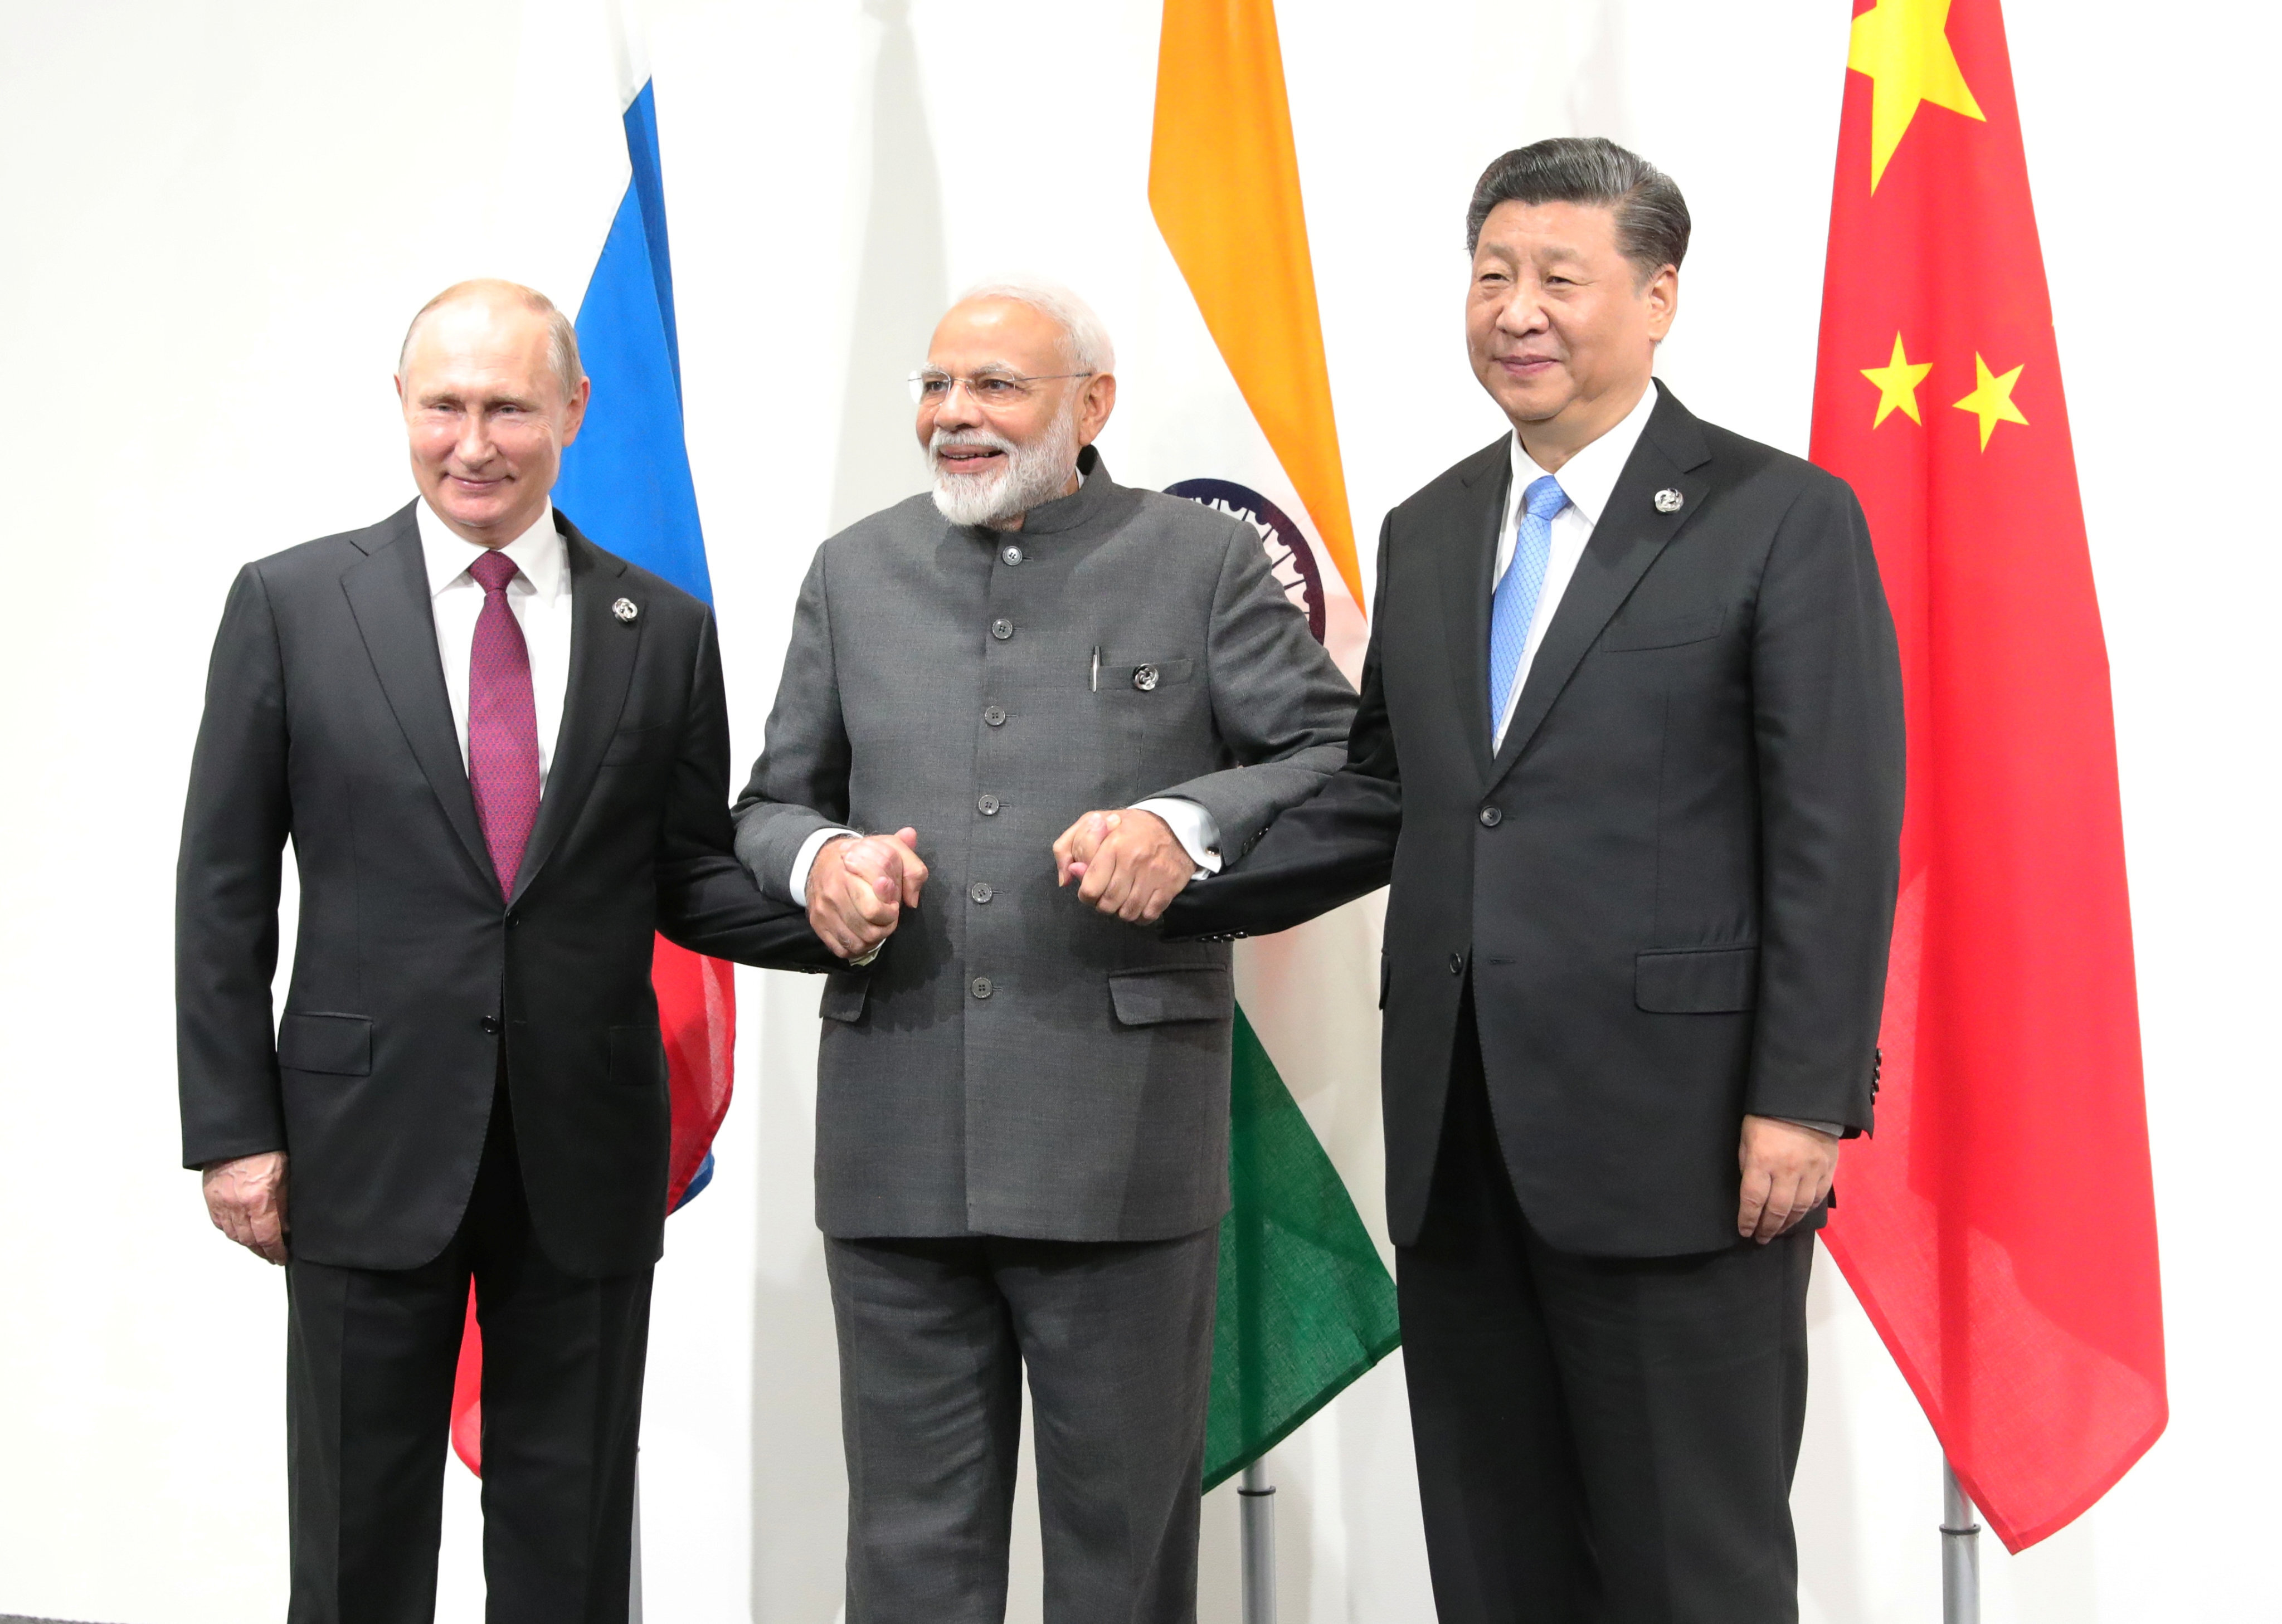 Russian President Vladimir Putin (left), Indian Prime Minister Narendra Modi (centre) and Chinese President Xi Jinping meet on the sidelines of the G20 summit in Osaka, Japan, on June 28, 2019. While India has been drawing closer to the US, it has signalled its support of China hosting the Winter Olympics and continues to buy military equipment from Russia. Photo:Reuters